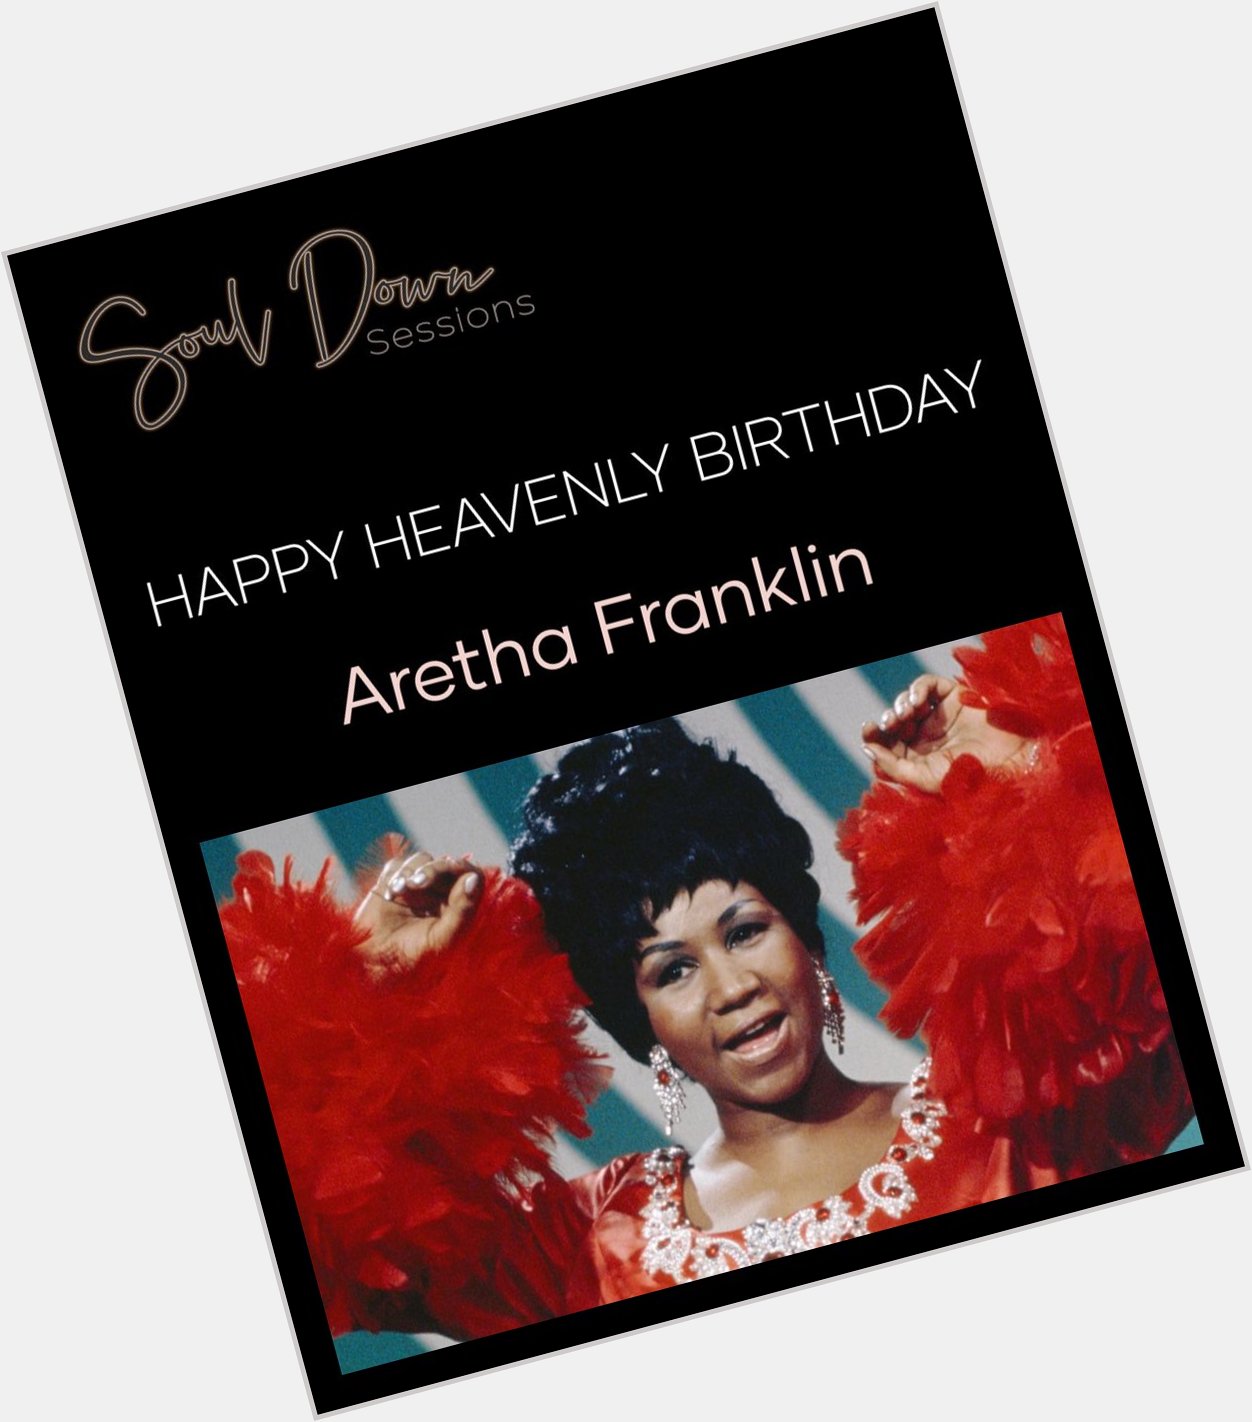 Happy Heavenly Birthday to the Queen of Soul, Aretha Franklin   